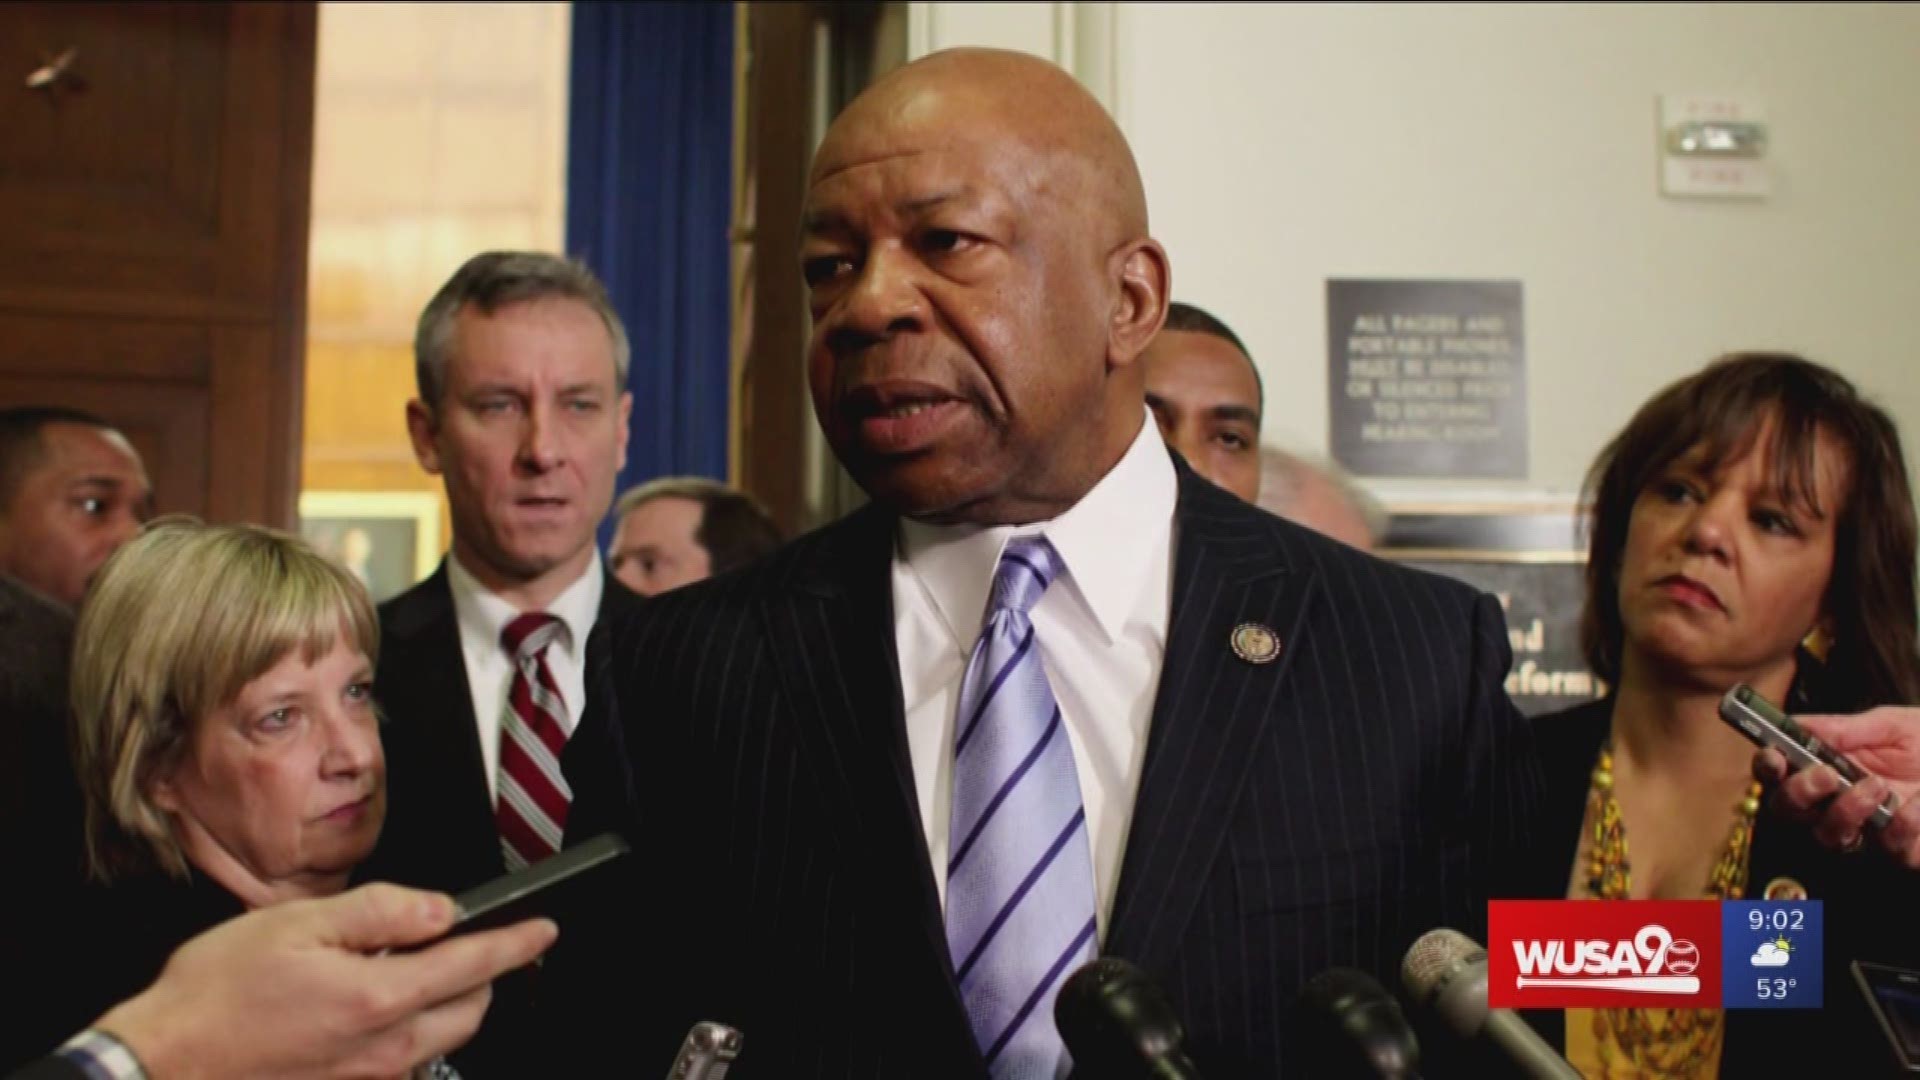 For our Morning Mix series, we give you a rundown on the latest news. This morning, Ellen, Kristen and Miri reflect on the life of U.S. Rep. Elijah Cummings.